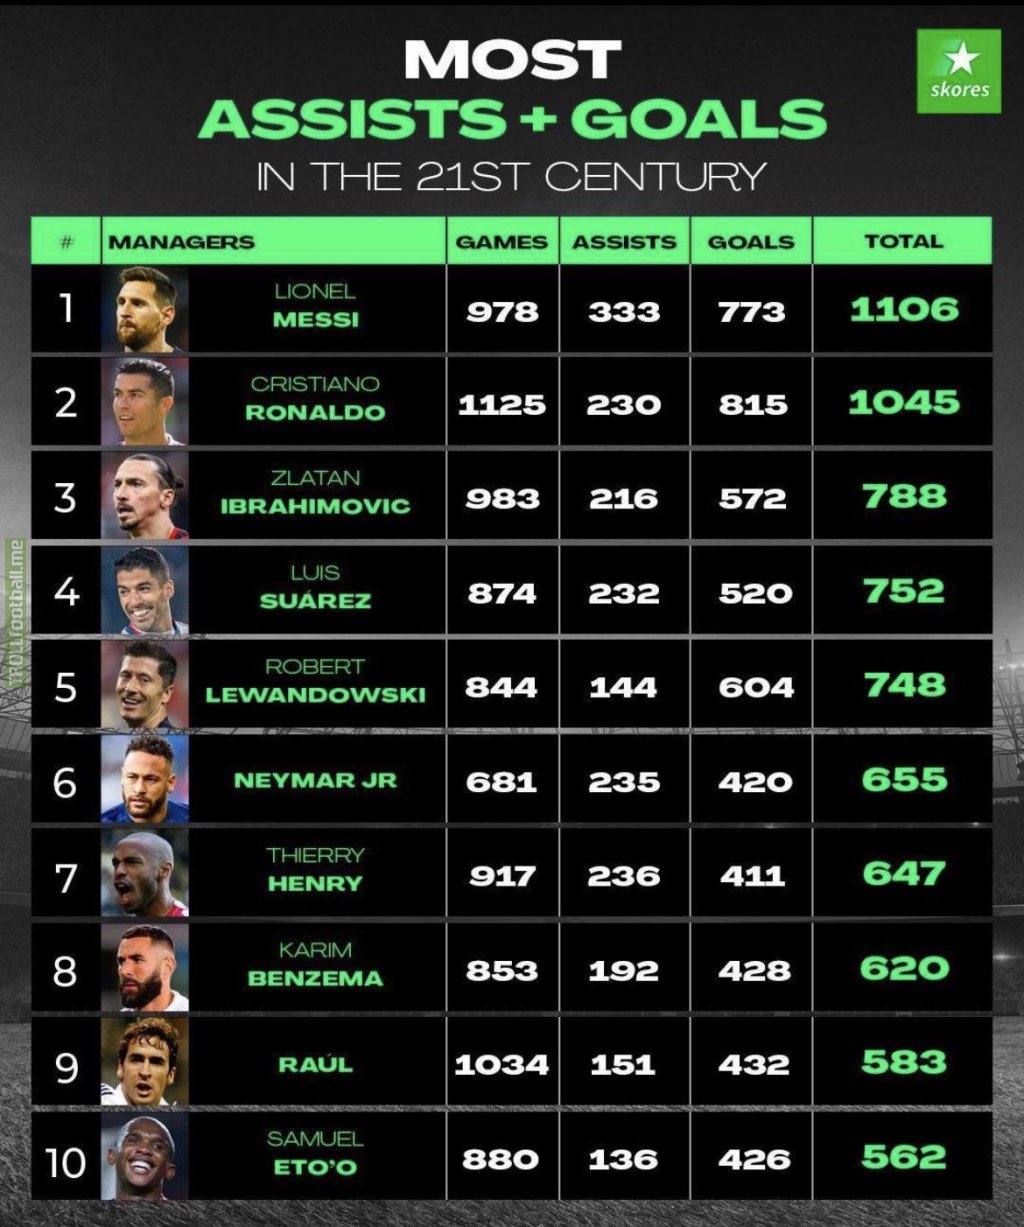 Most Goals + Assists in the 21st Century